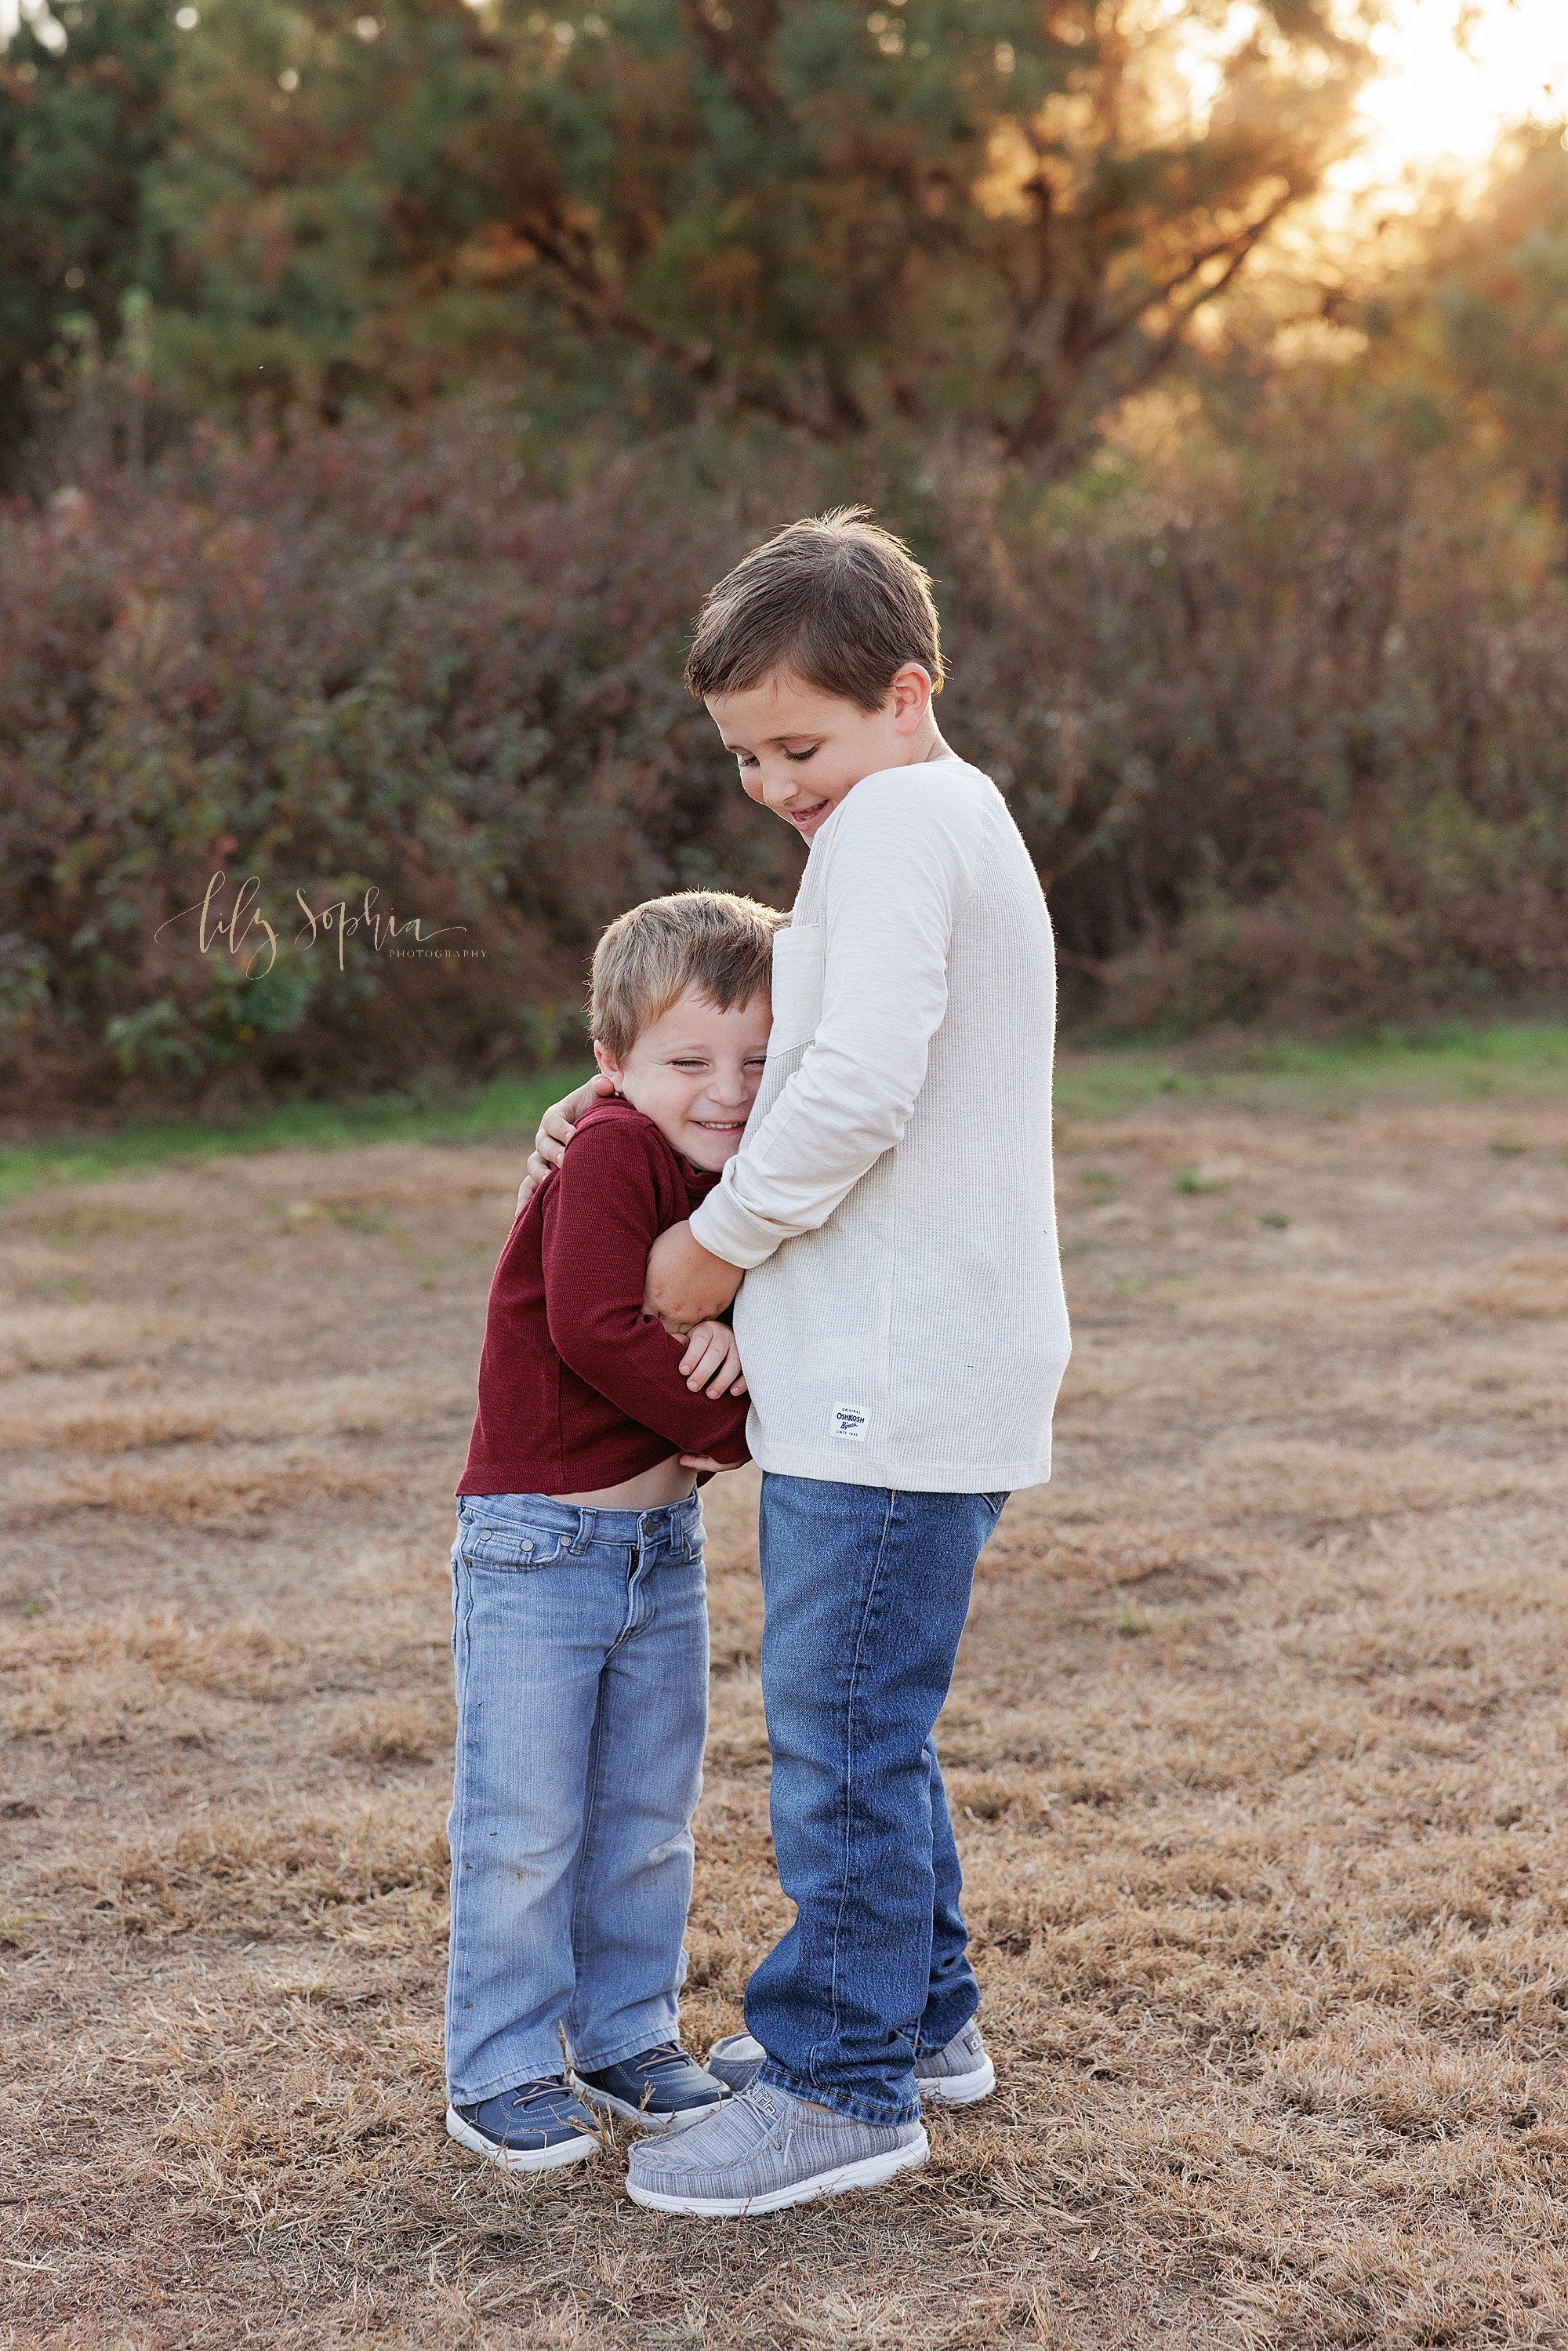  Capturing fun between two brothers as the elder brother tickles the younger brother for a family photo taken during autumn in a field near Atlanta, Georgia at sunset. 